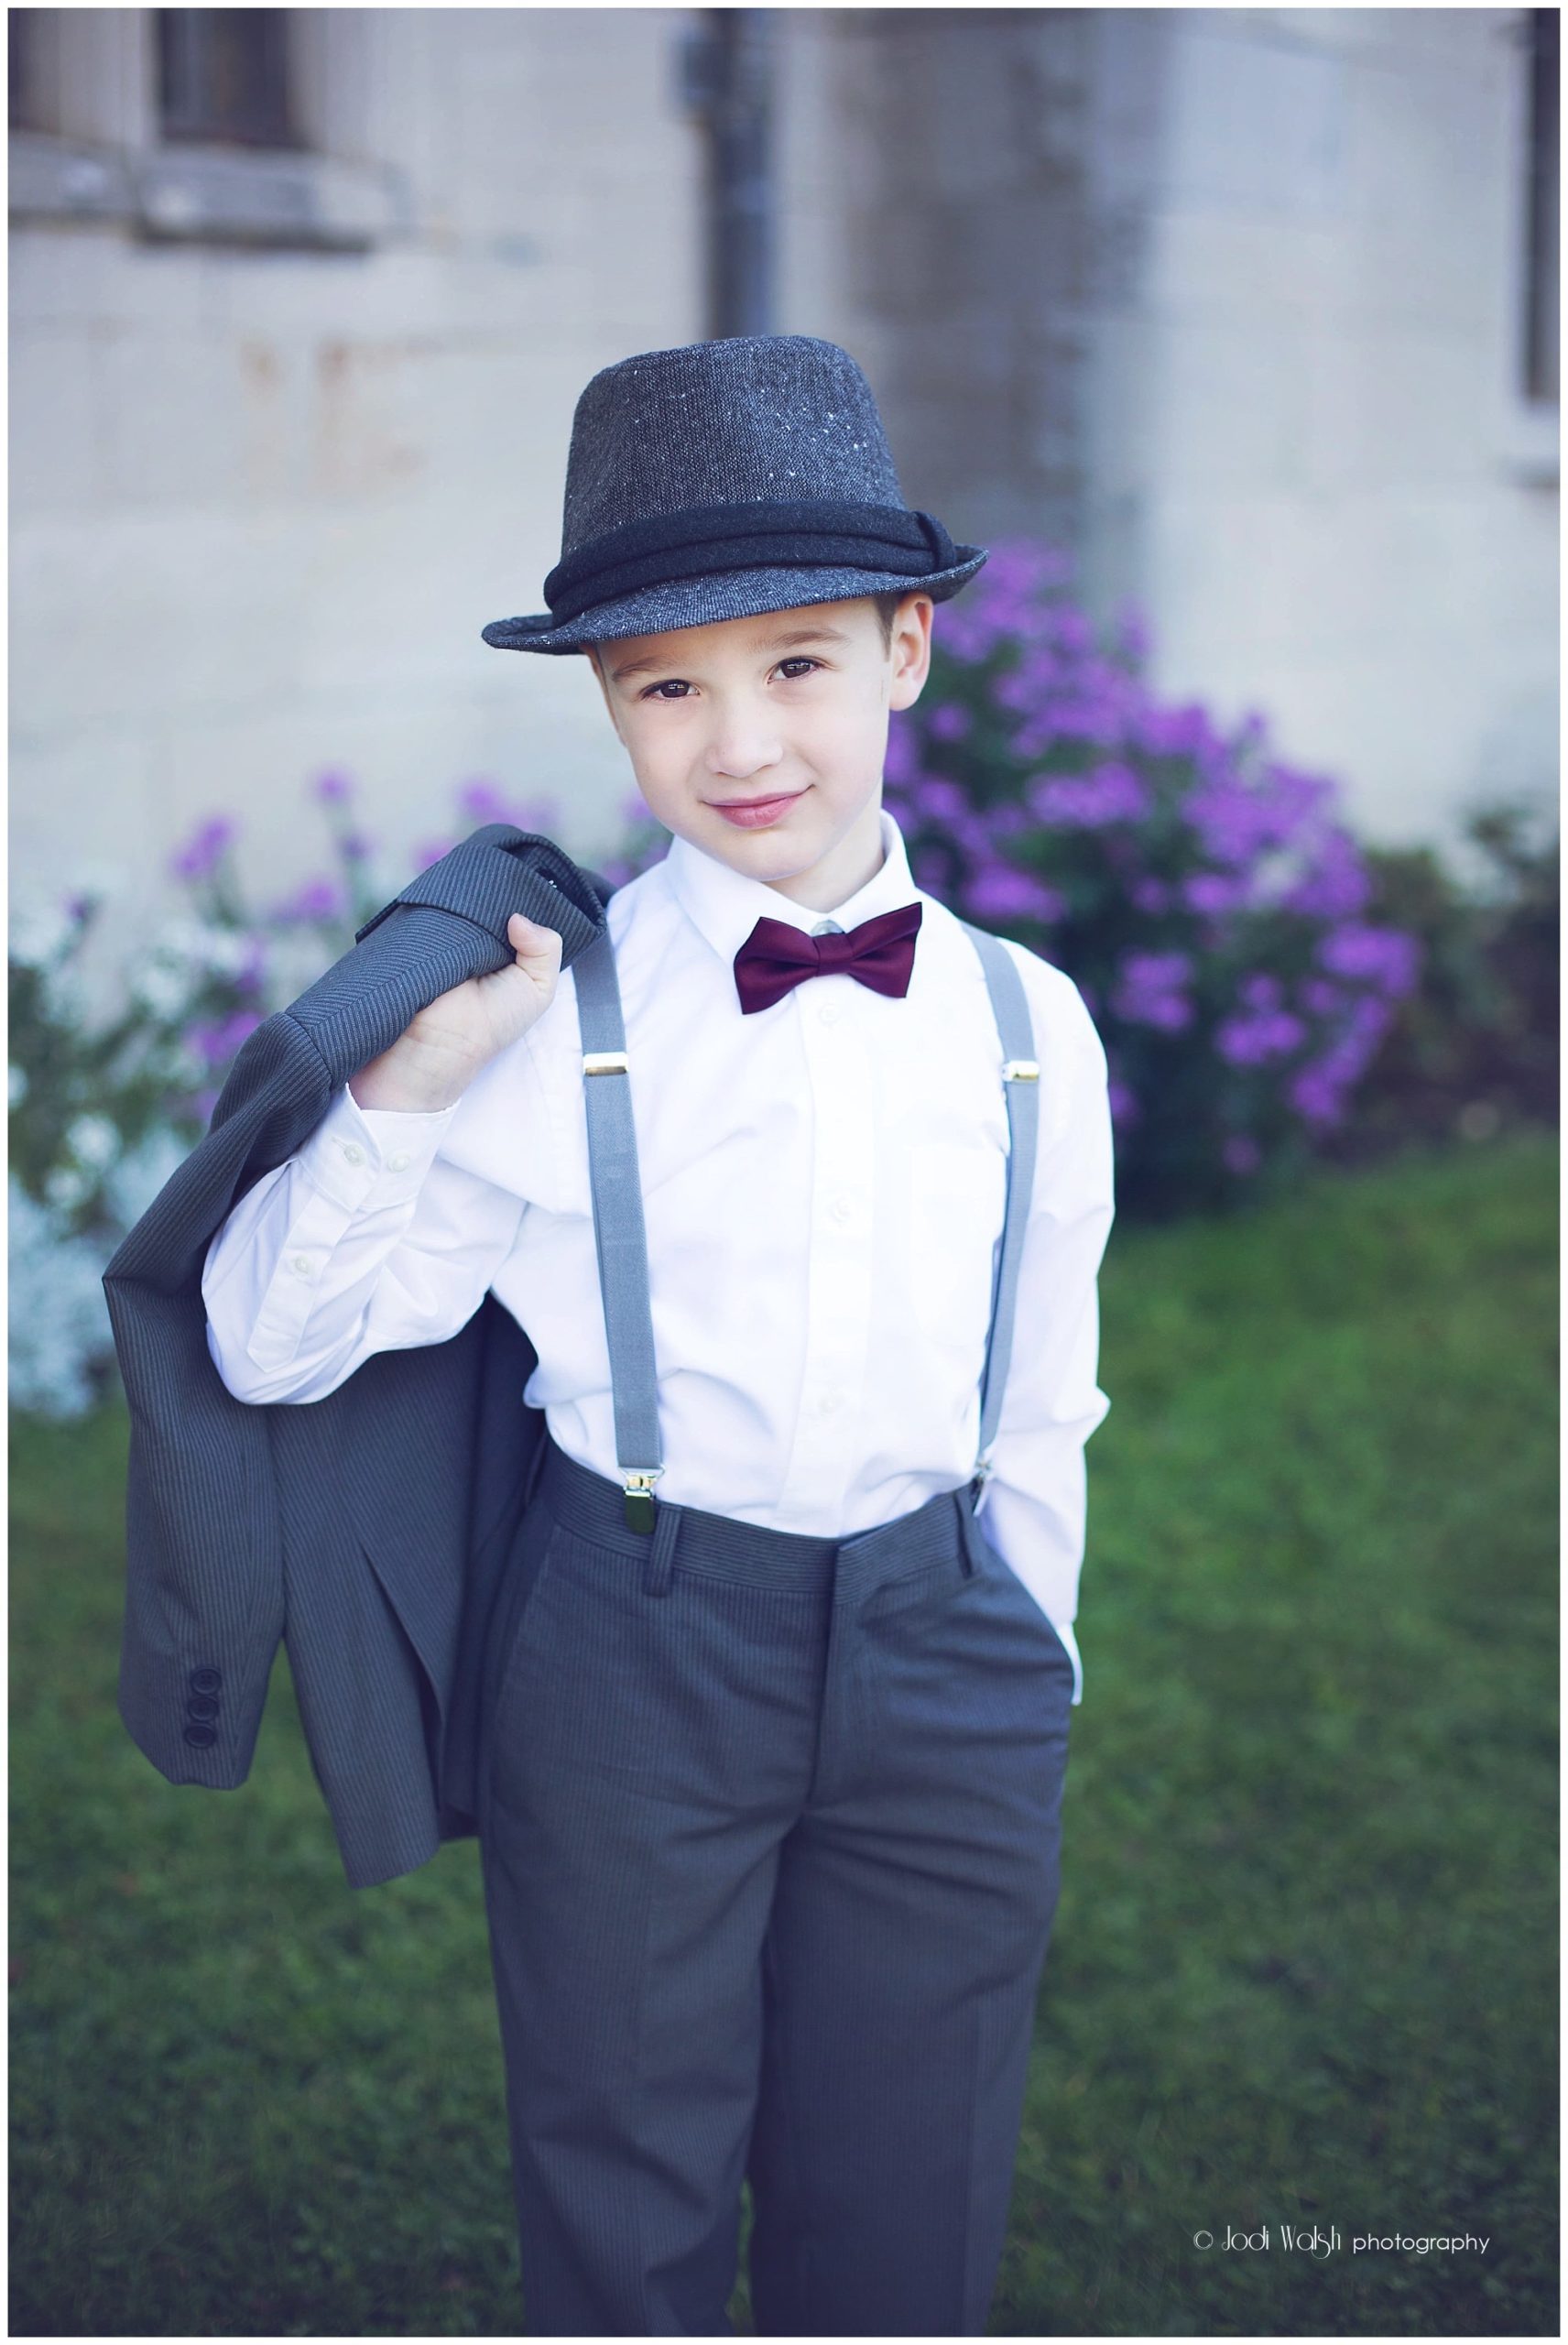 little boy in hat, suspenders and bow tie